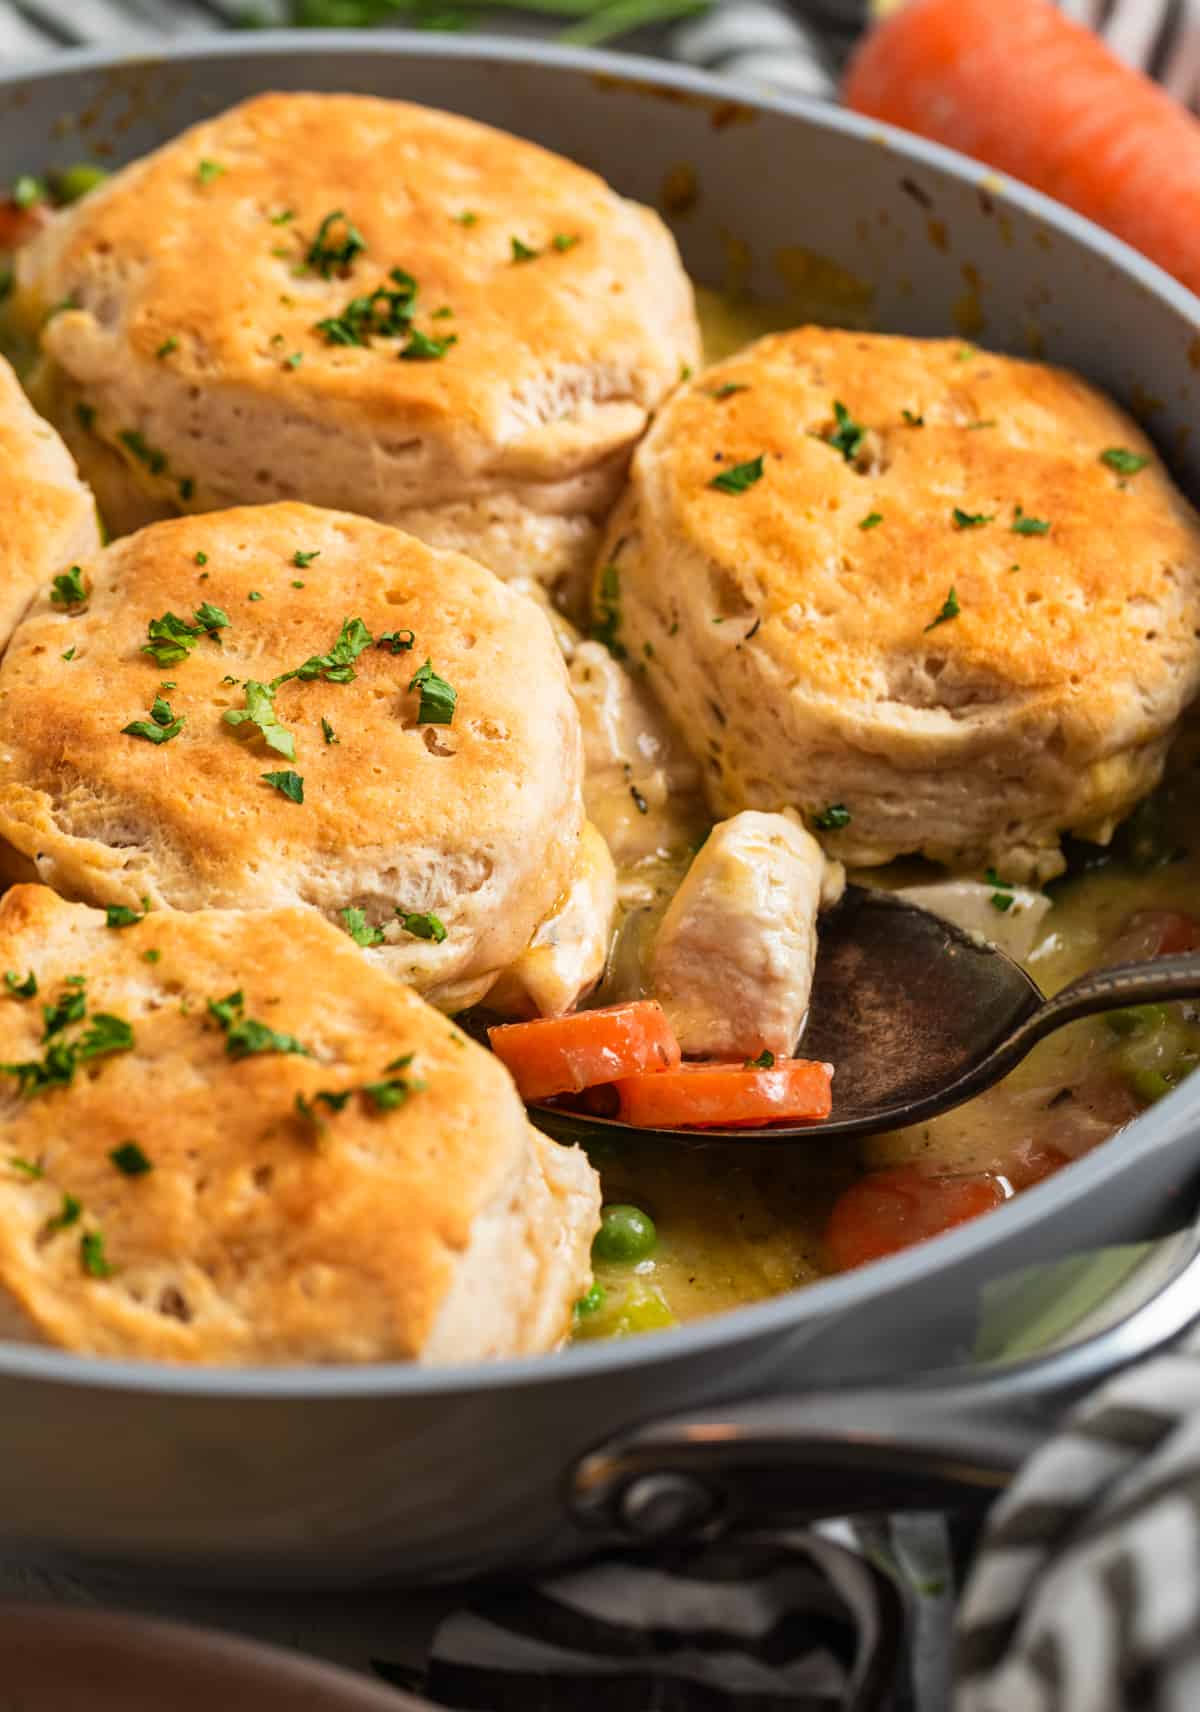 Skillet with chicken and biscuits and serving spoon scooping into it.